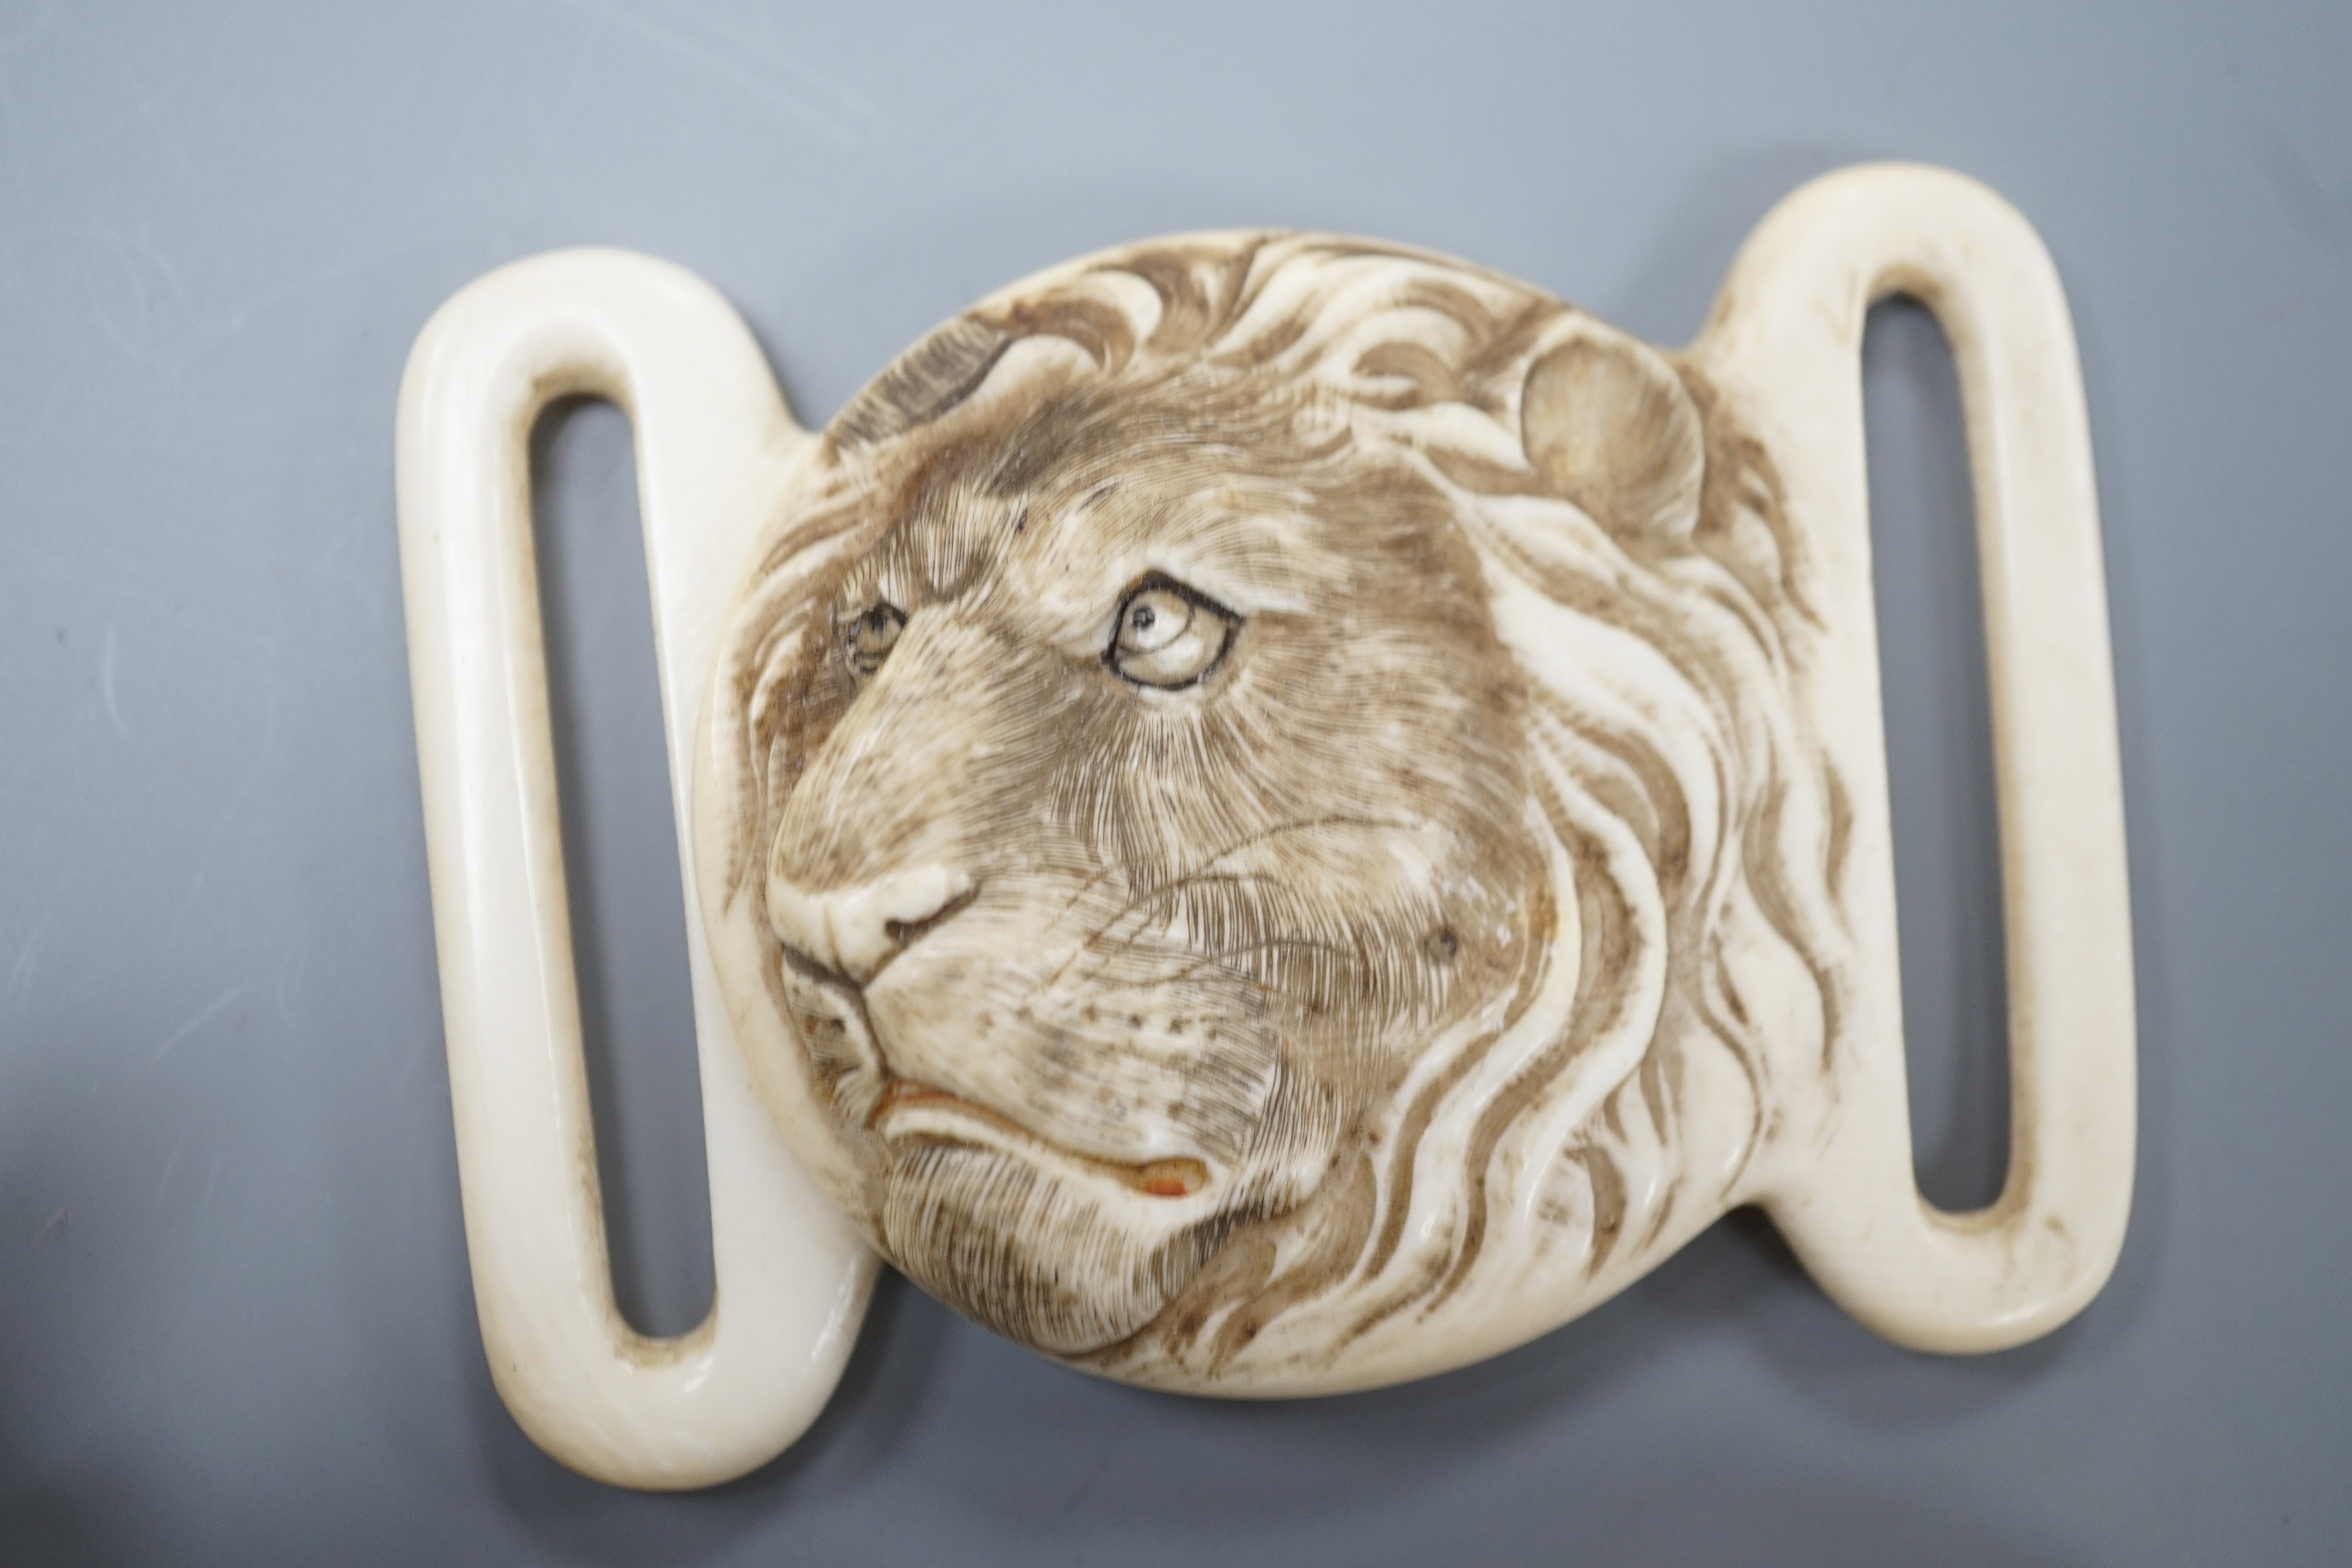 Two Japanese lacquer boxes, an ivory and bronze manju, an ivory ‘lion’ two-piece belt buckle and two simulated ivory items, late 19th/early 20th century, largest Box 11.5 cm